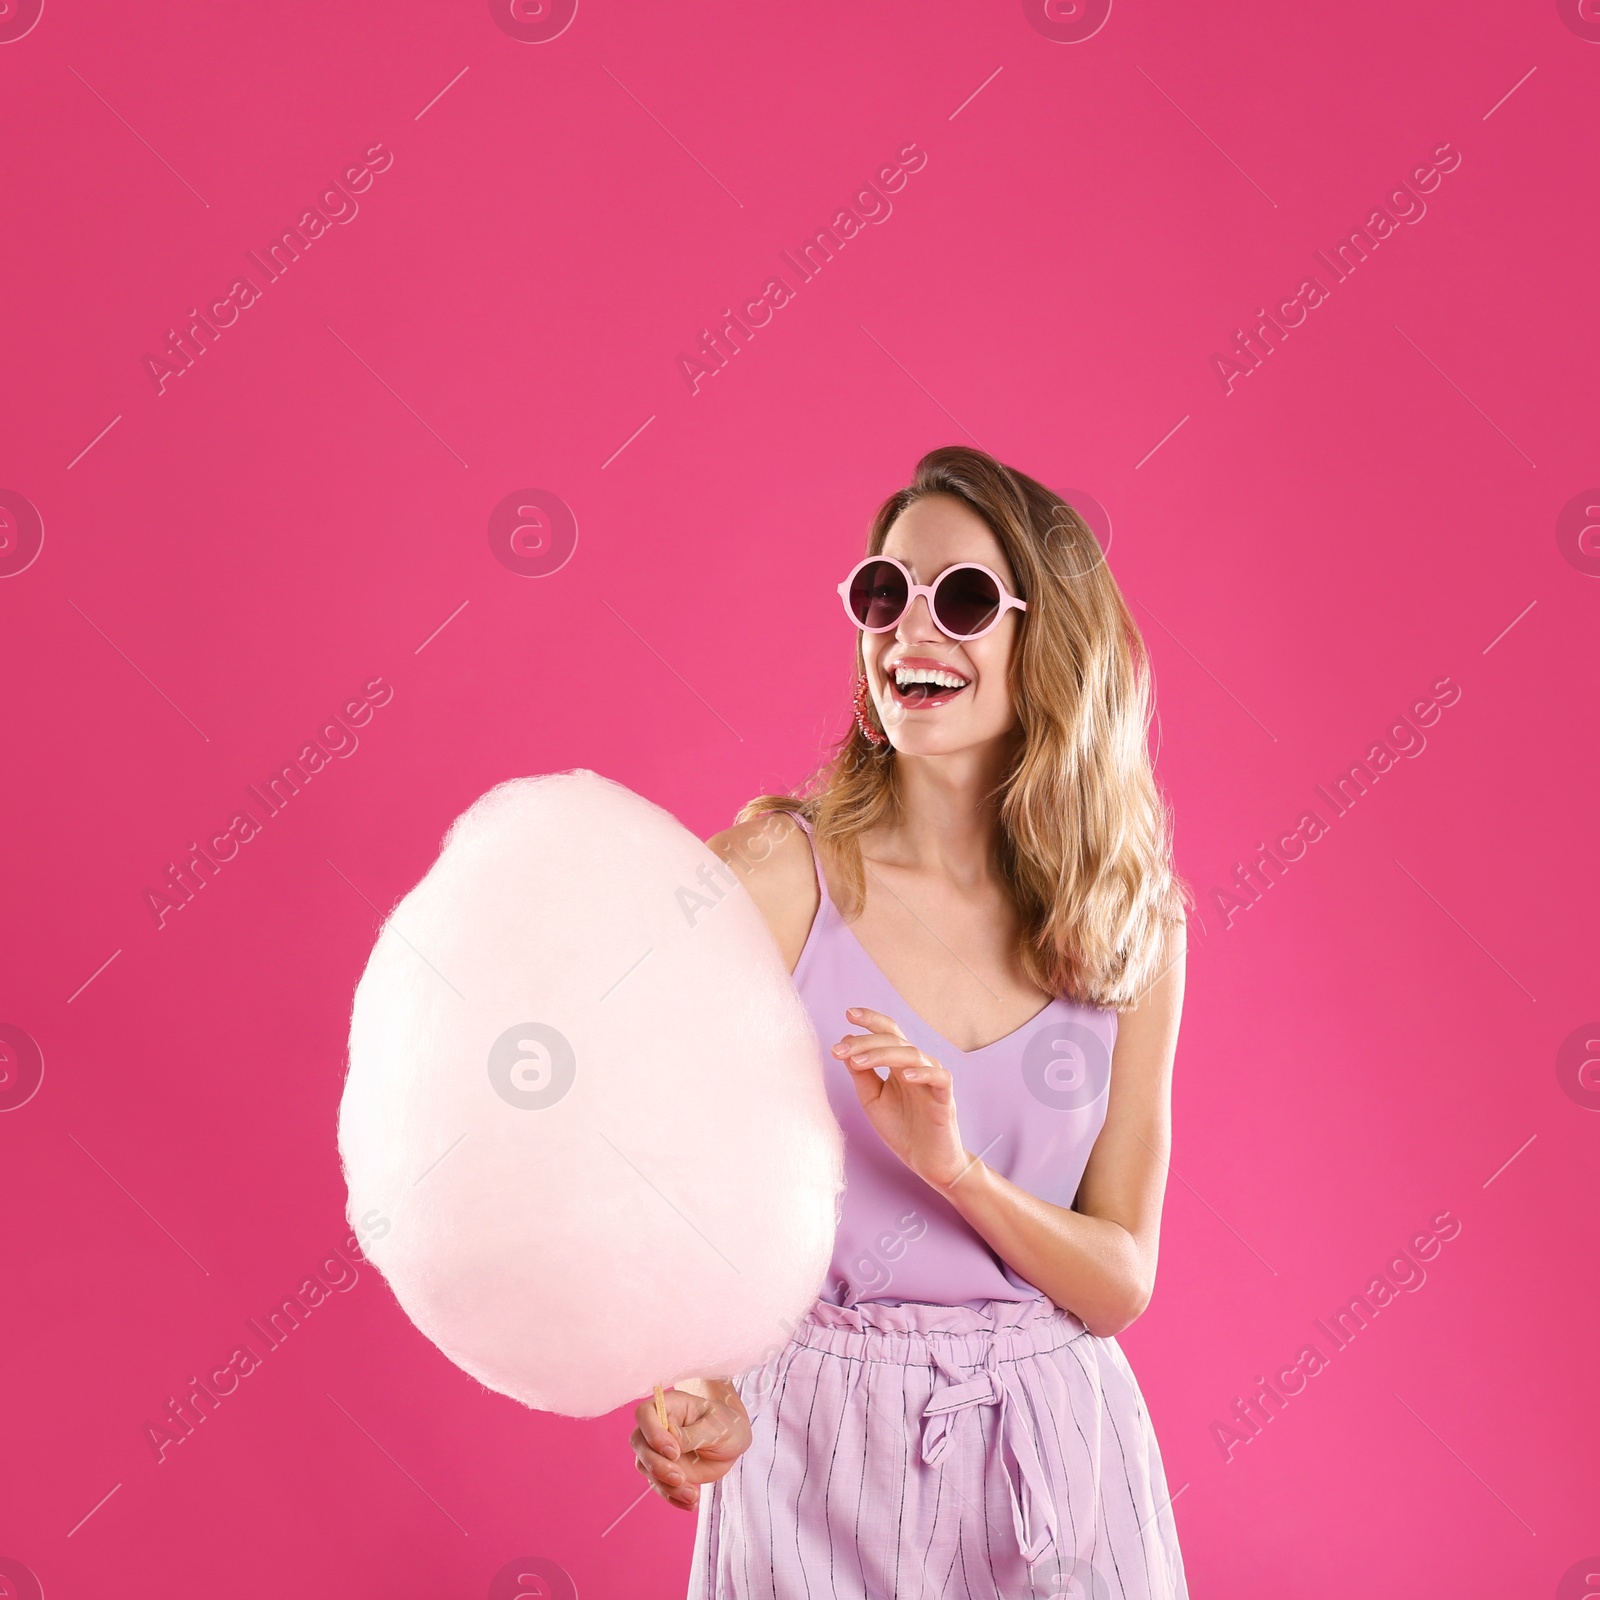 Photo of Happy young woman with cotton candy on pink background